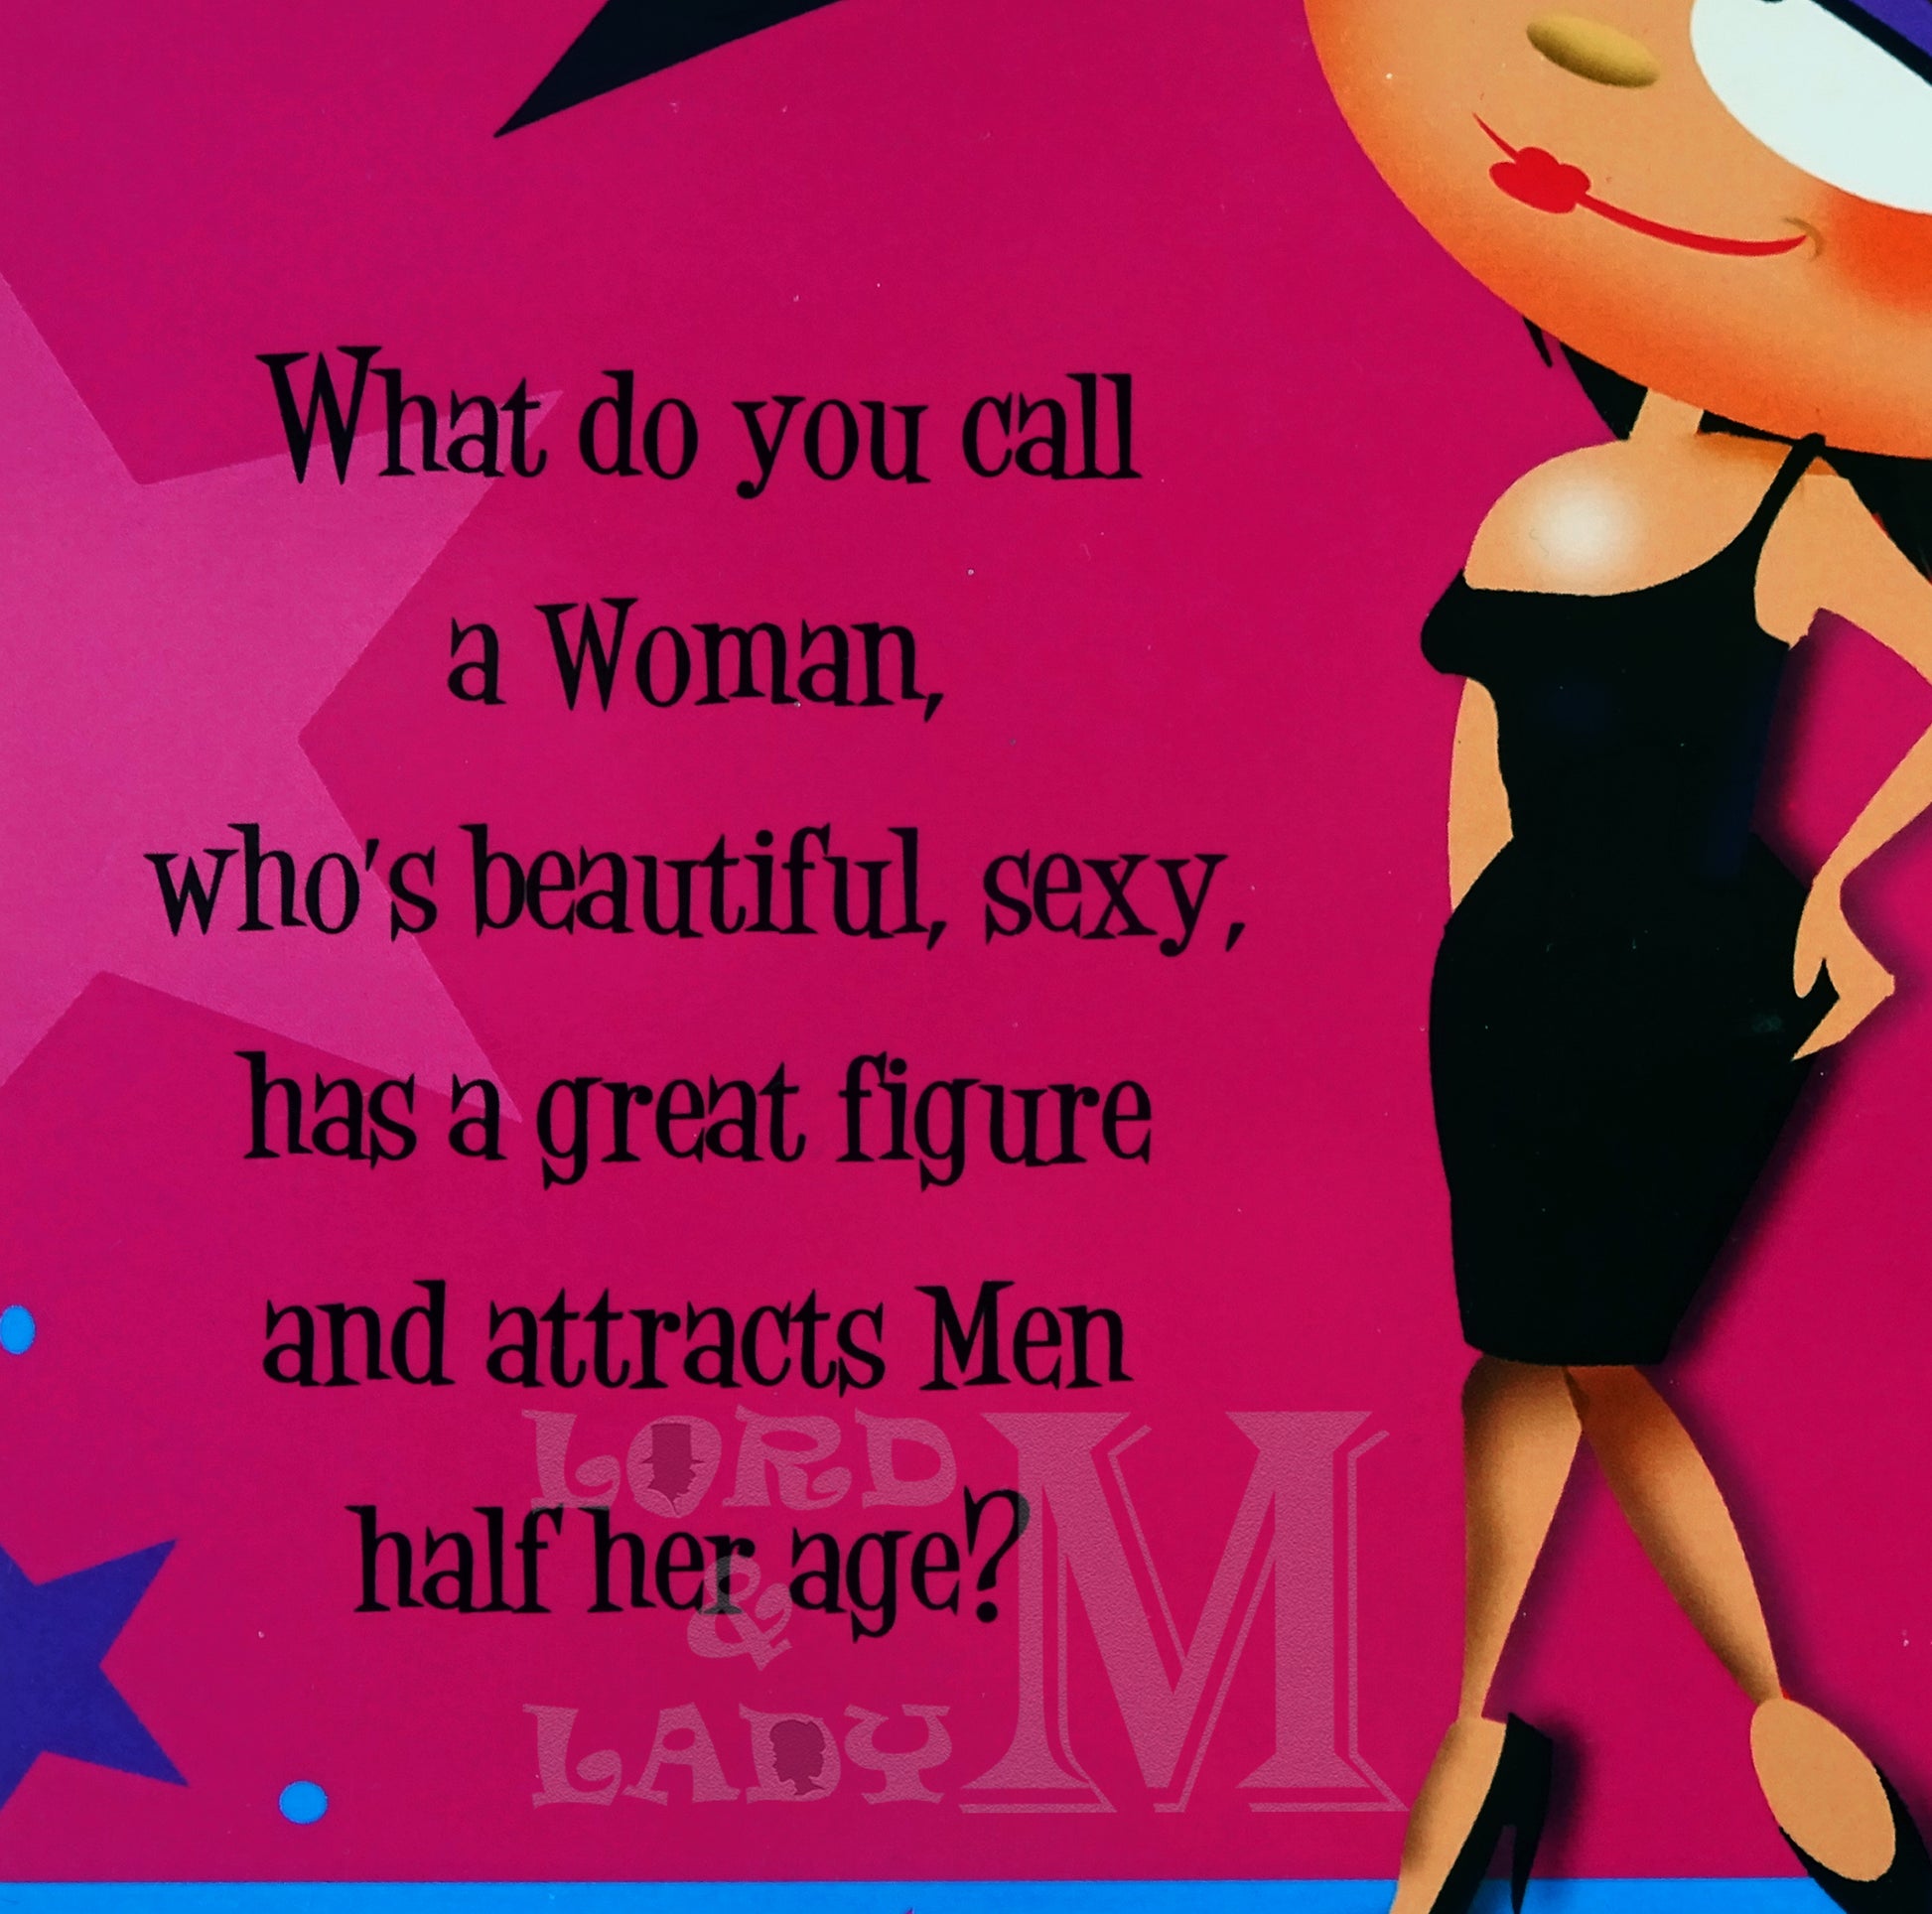 23cm - 40 Today What Do You Call A Woman ... - CWH